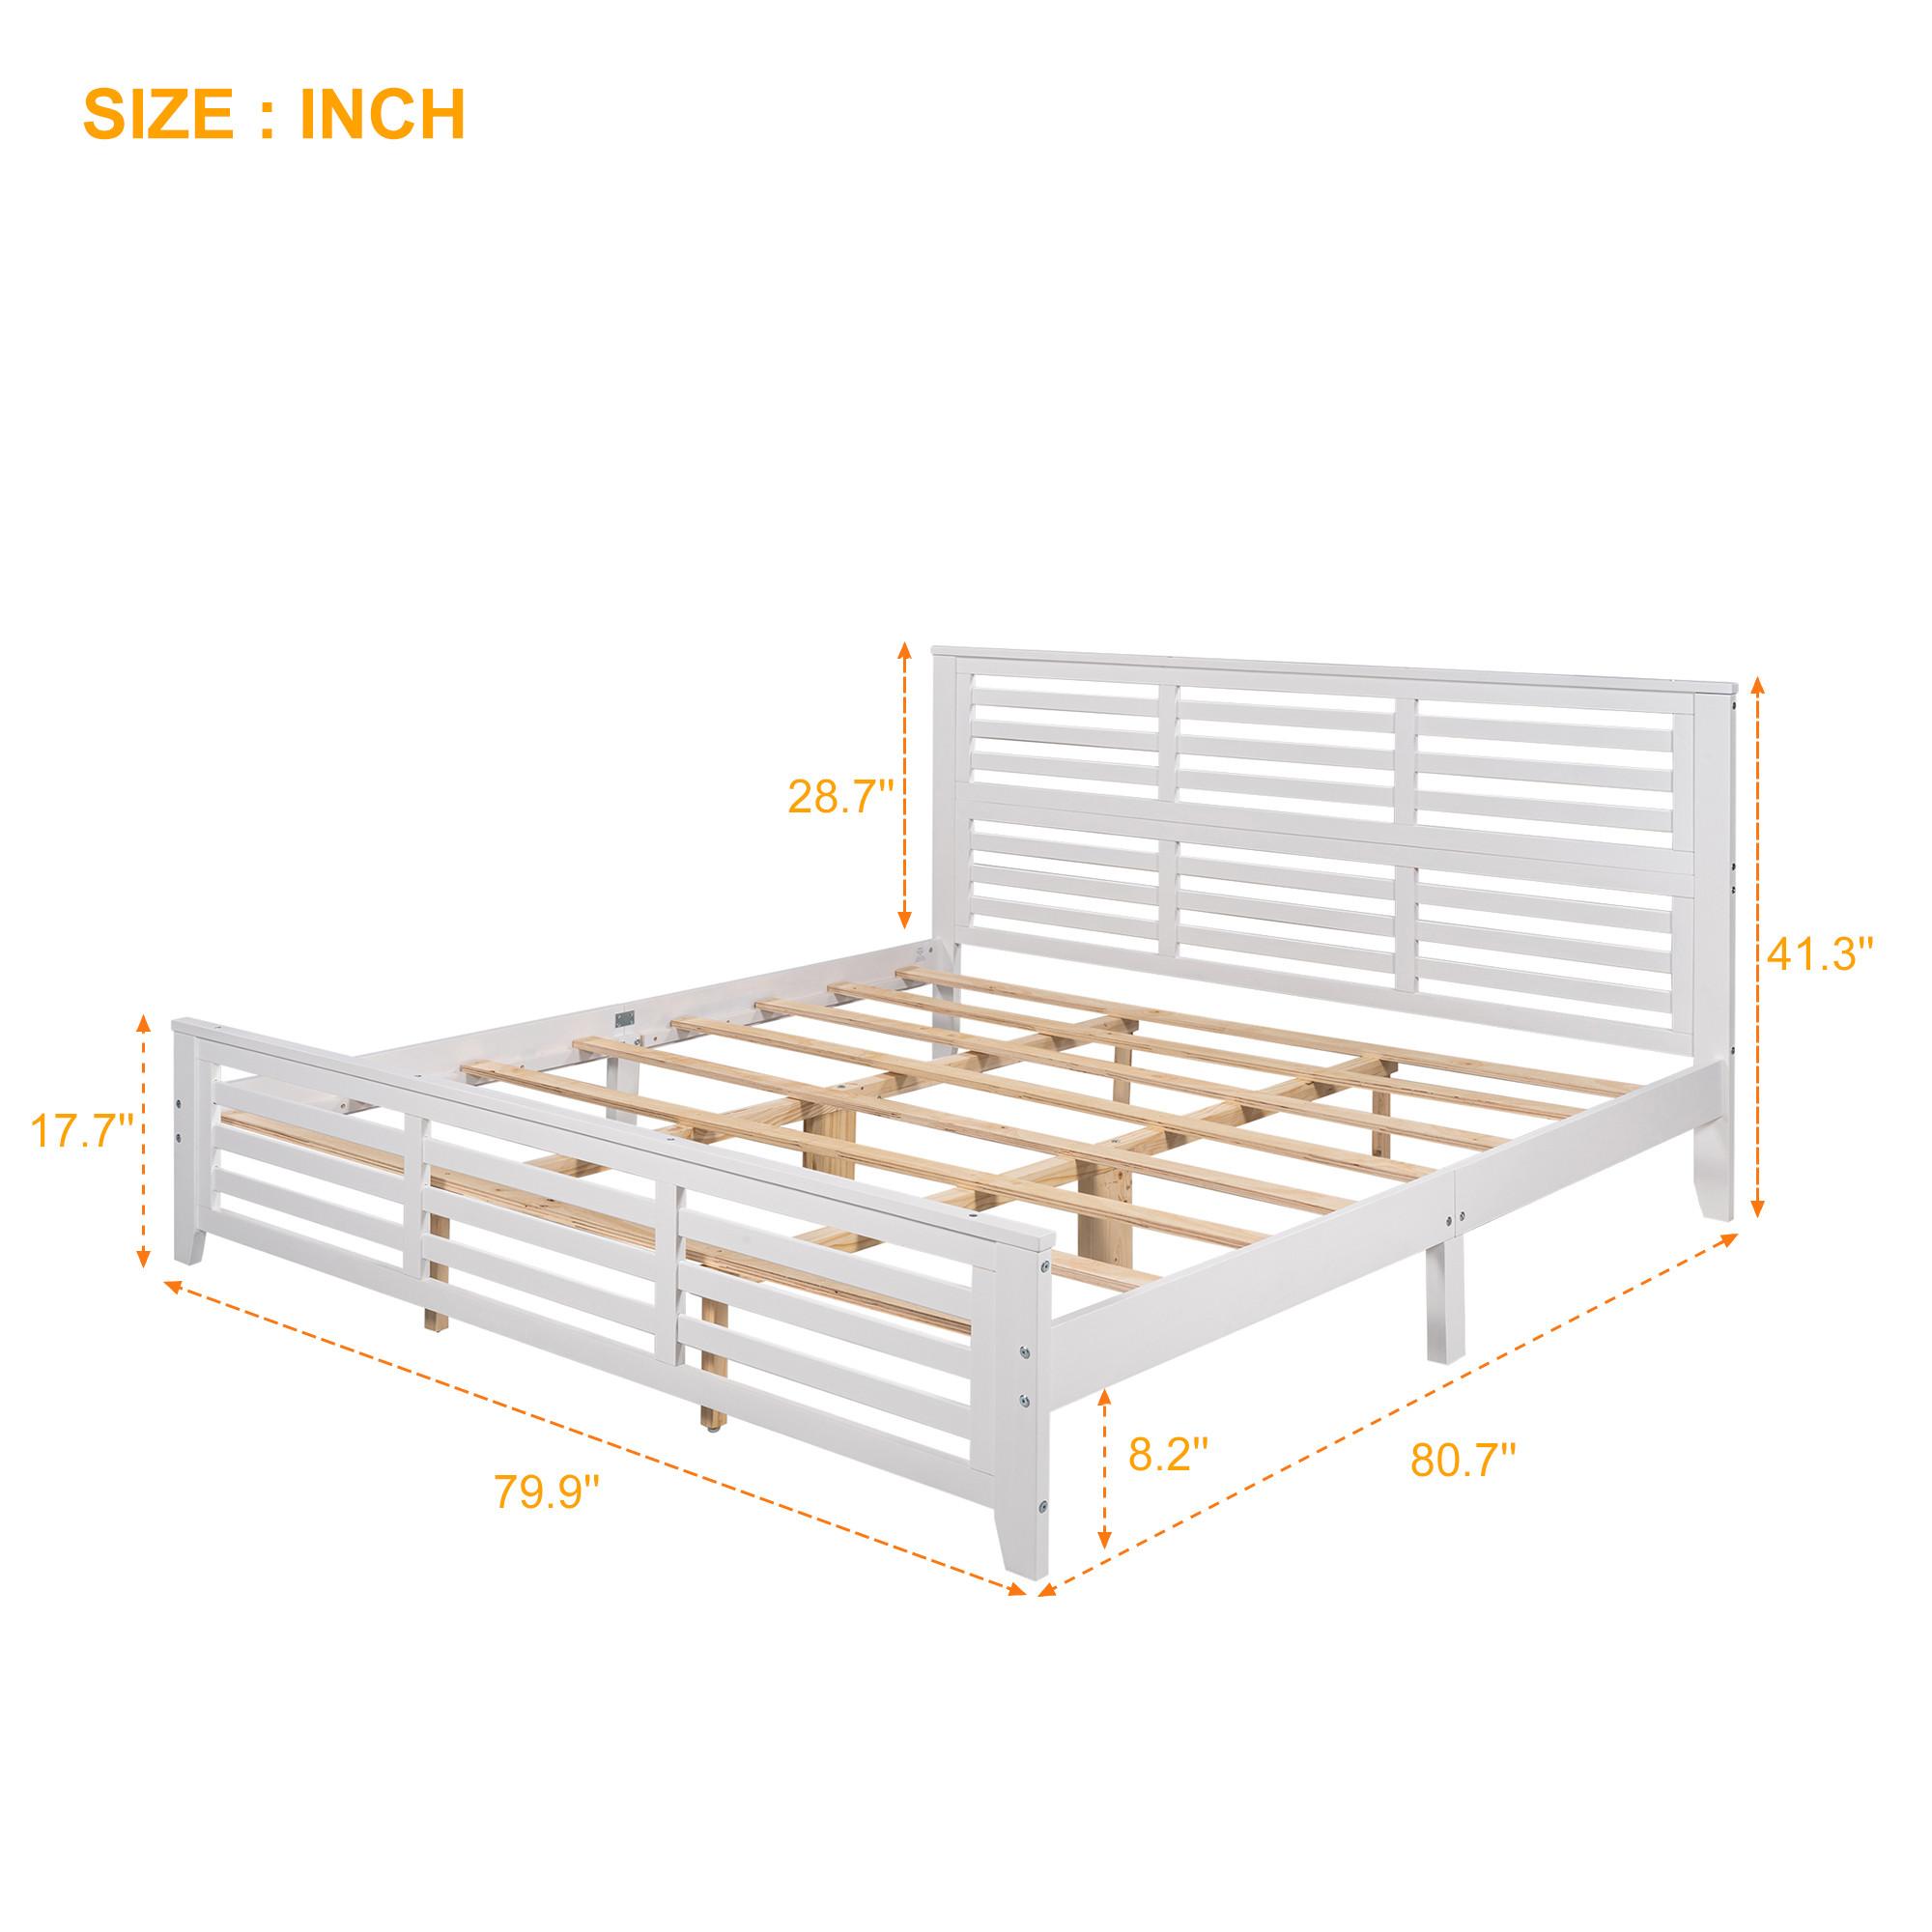 King Size Wood Platform Bed Frame with Headboard and Footboard, Solid Wood Foundation with Slat Support, White 79.9x80.7x41.3inch - image 4 of 7